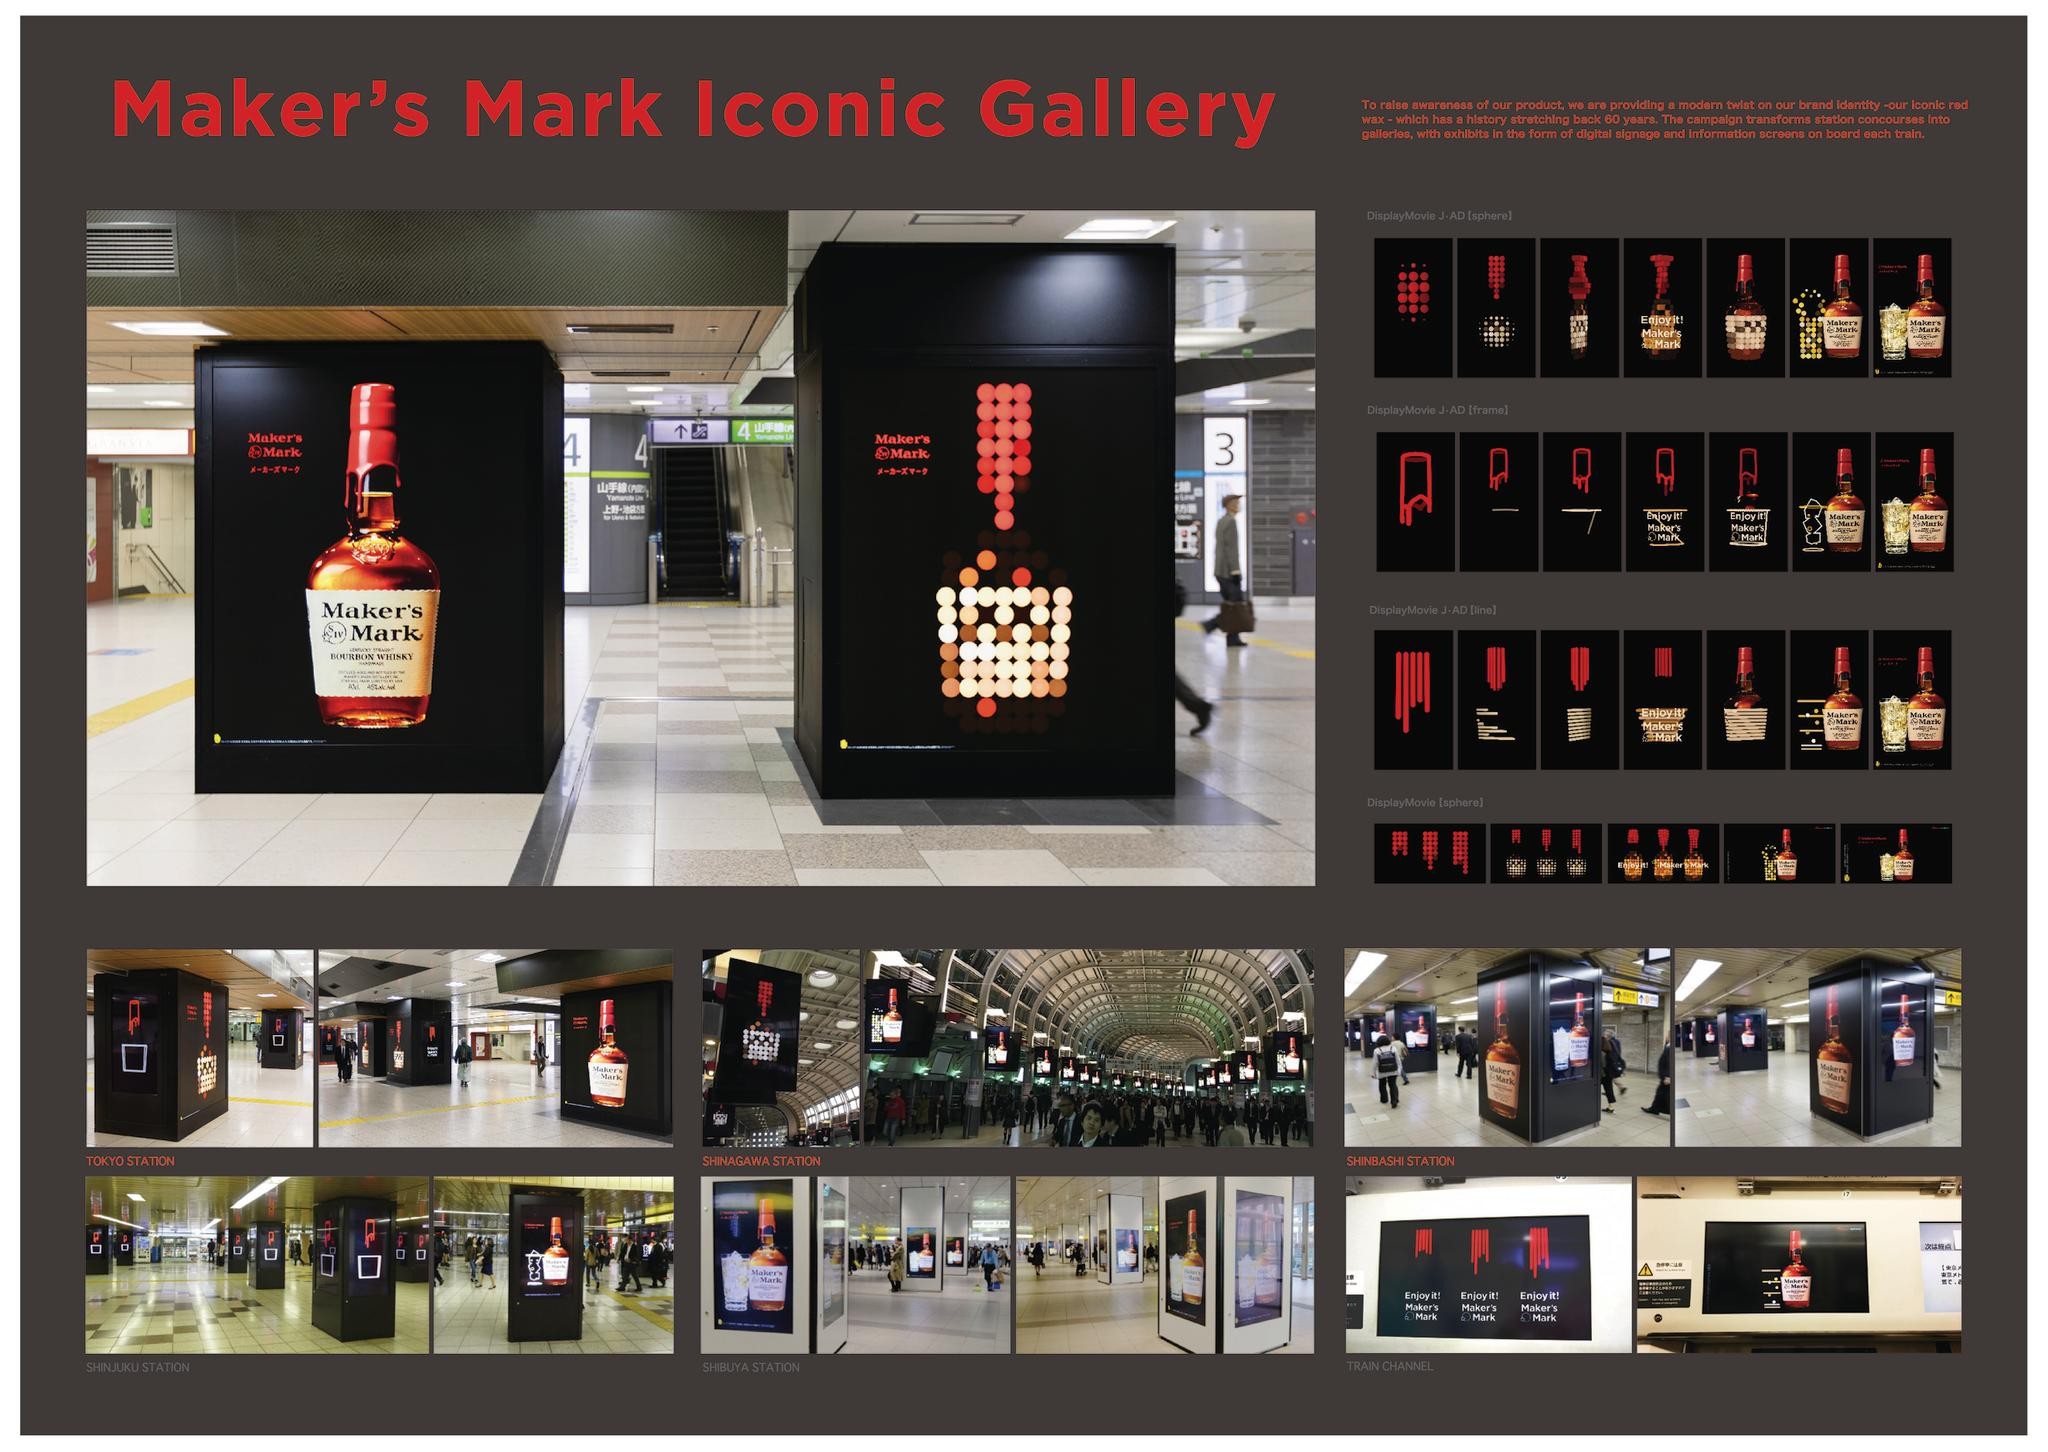 Maker's Mark Iconic Gallery